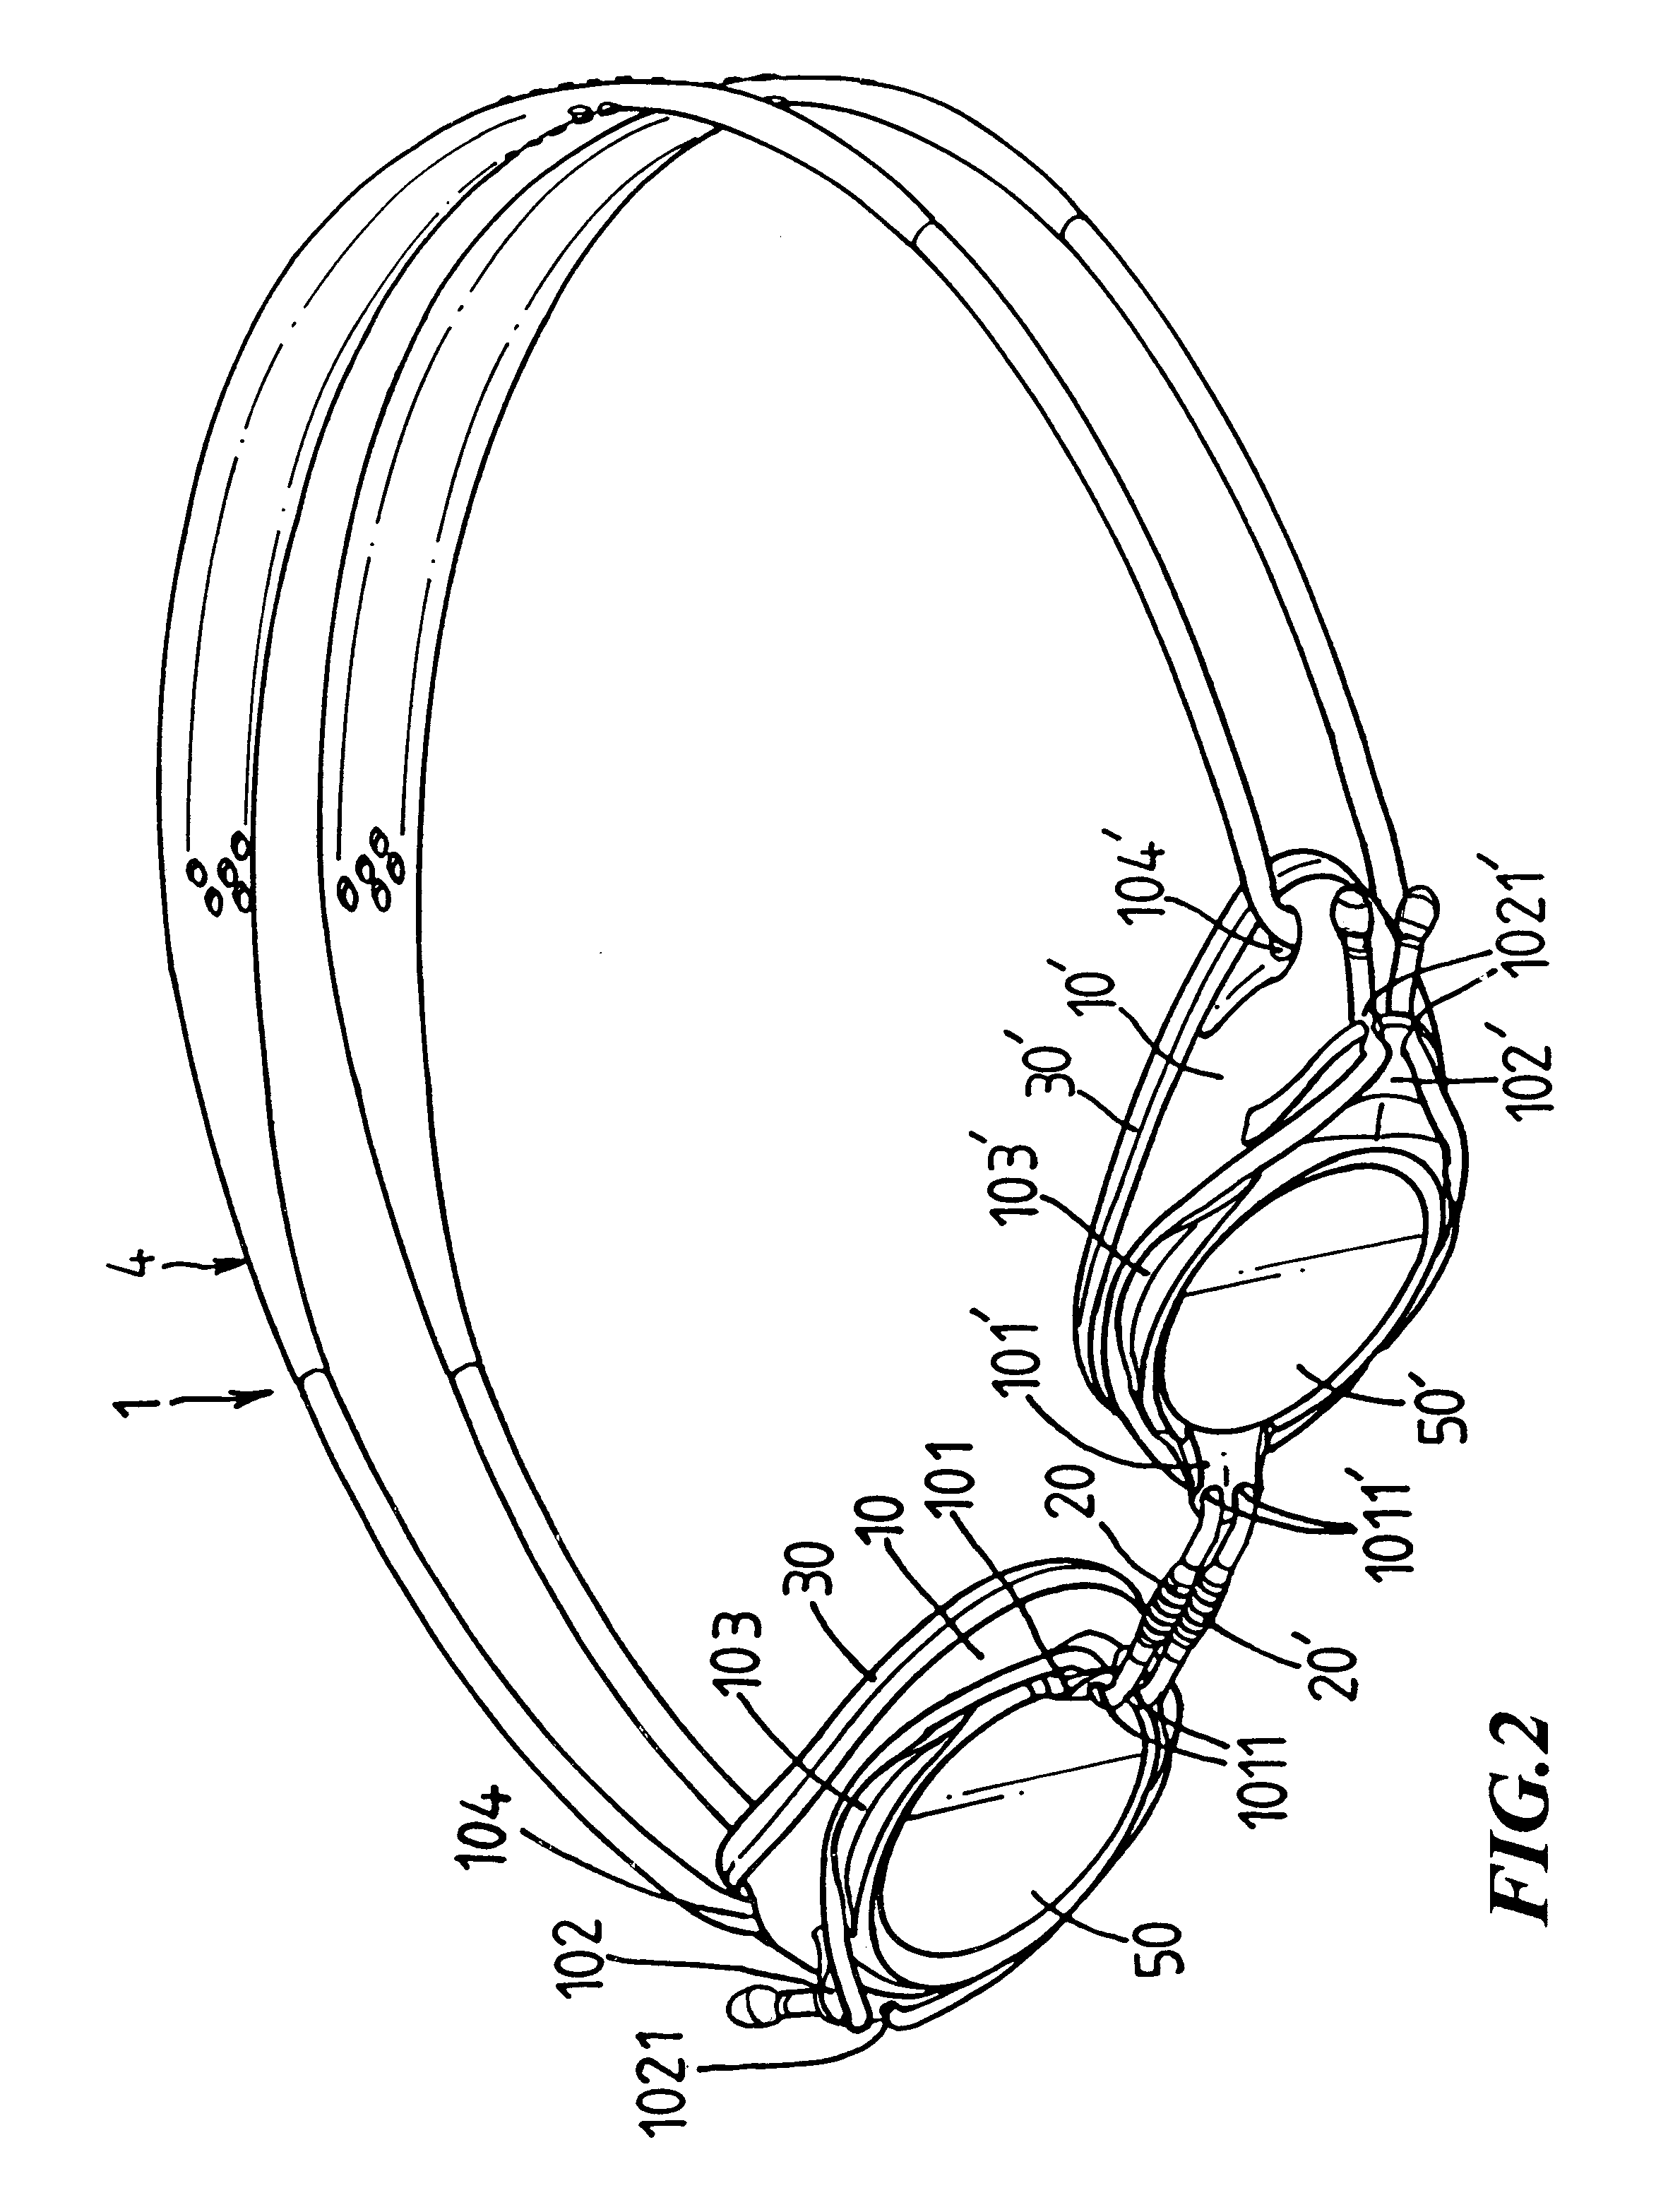 Swimming goggles with step-less adjustment